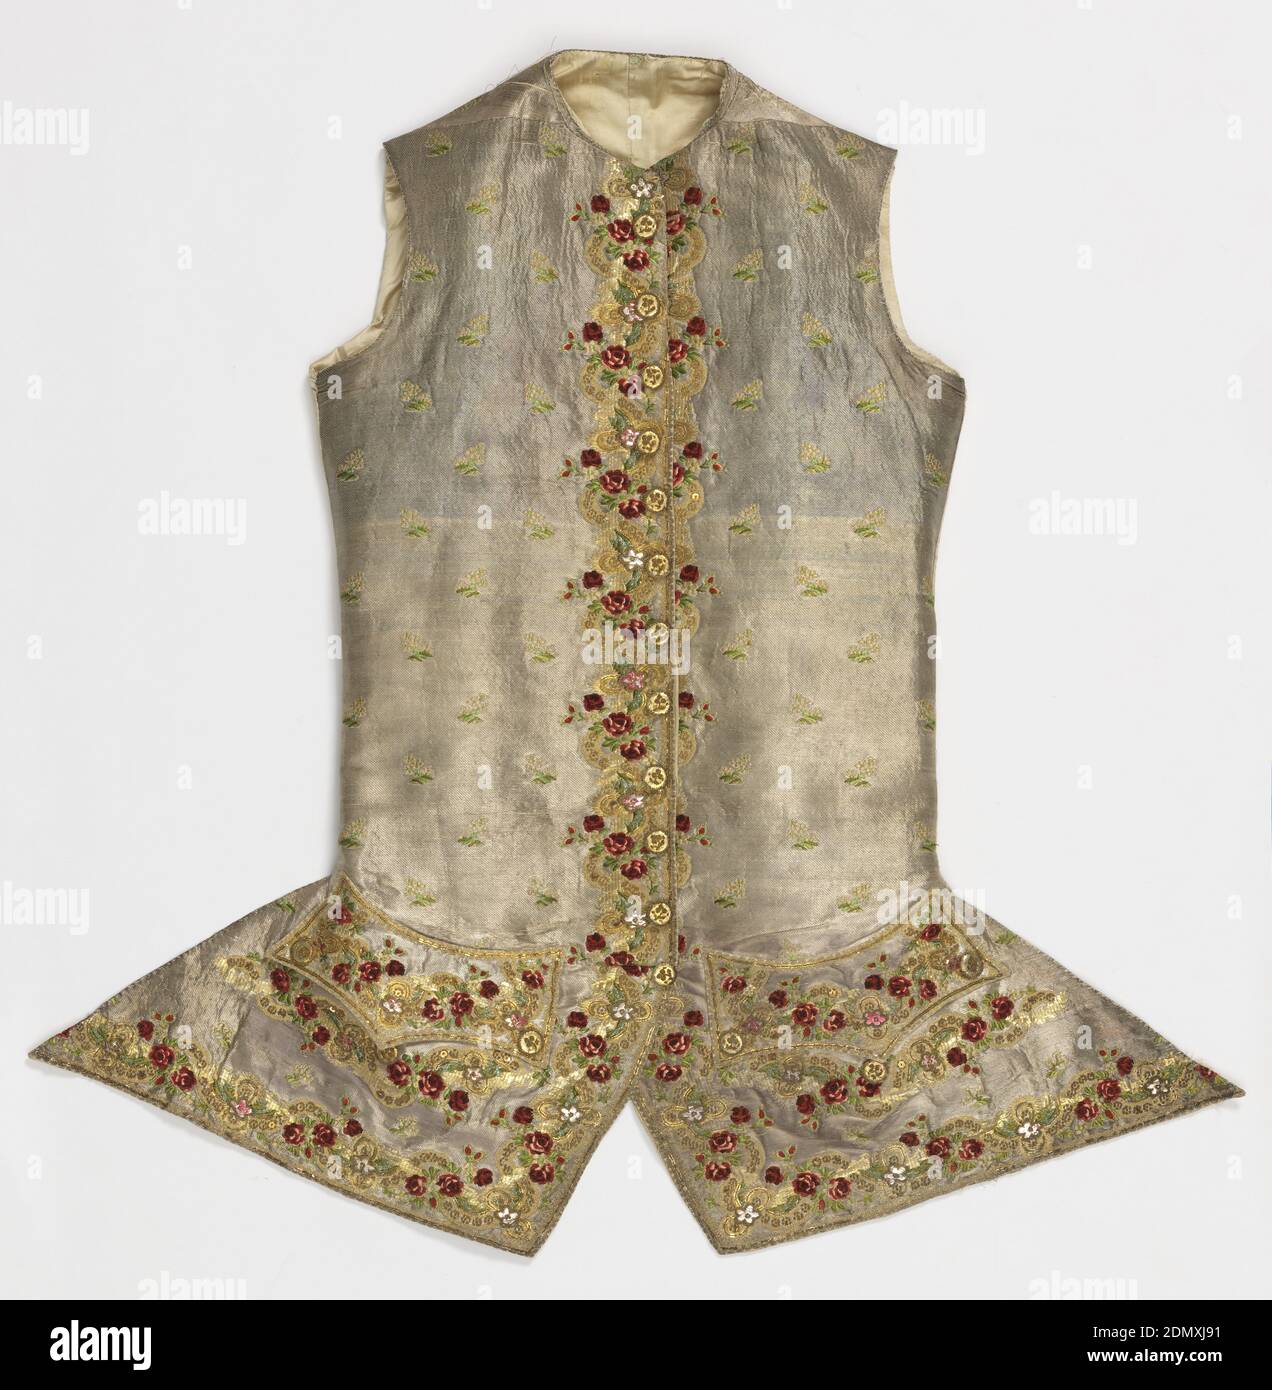 Waistcoat, Medium: silk, metallic thread Technique: embroidered, plain and twill weave, Waistcoat of silver cloth brocaded in a small flower pattern with a two and half inch border, woven in one with the cloth. Metal is bound in twill weave. Border is an elaborate combination of chenille and three kinds of fine gold cord. Design is small red roses and green foliage in chenille intertwined with a meander of gold, and ornament in meander of raised loops. Flower heads of foil outlined in fine gold bullion stitches; outline of parts of the design, of front of waistcoat, and of pockets Stock Photo